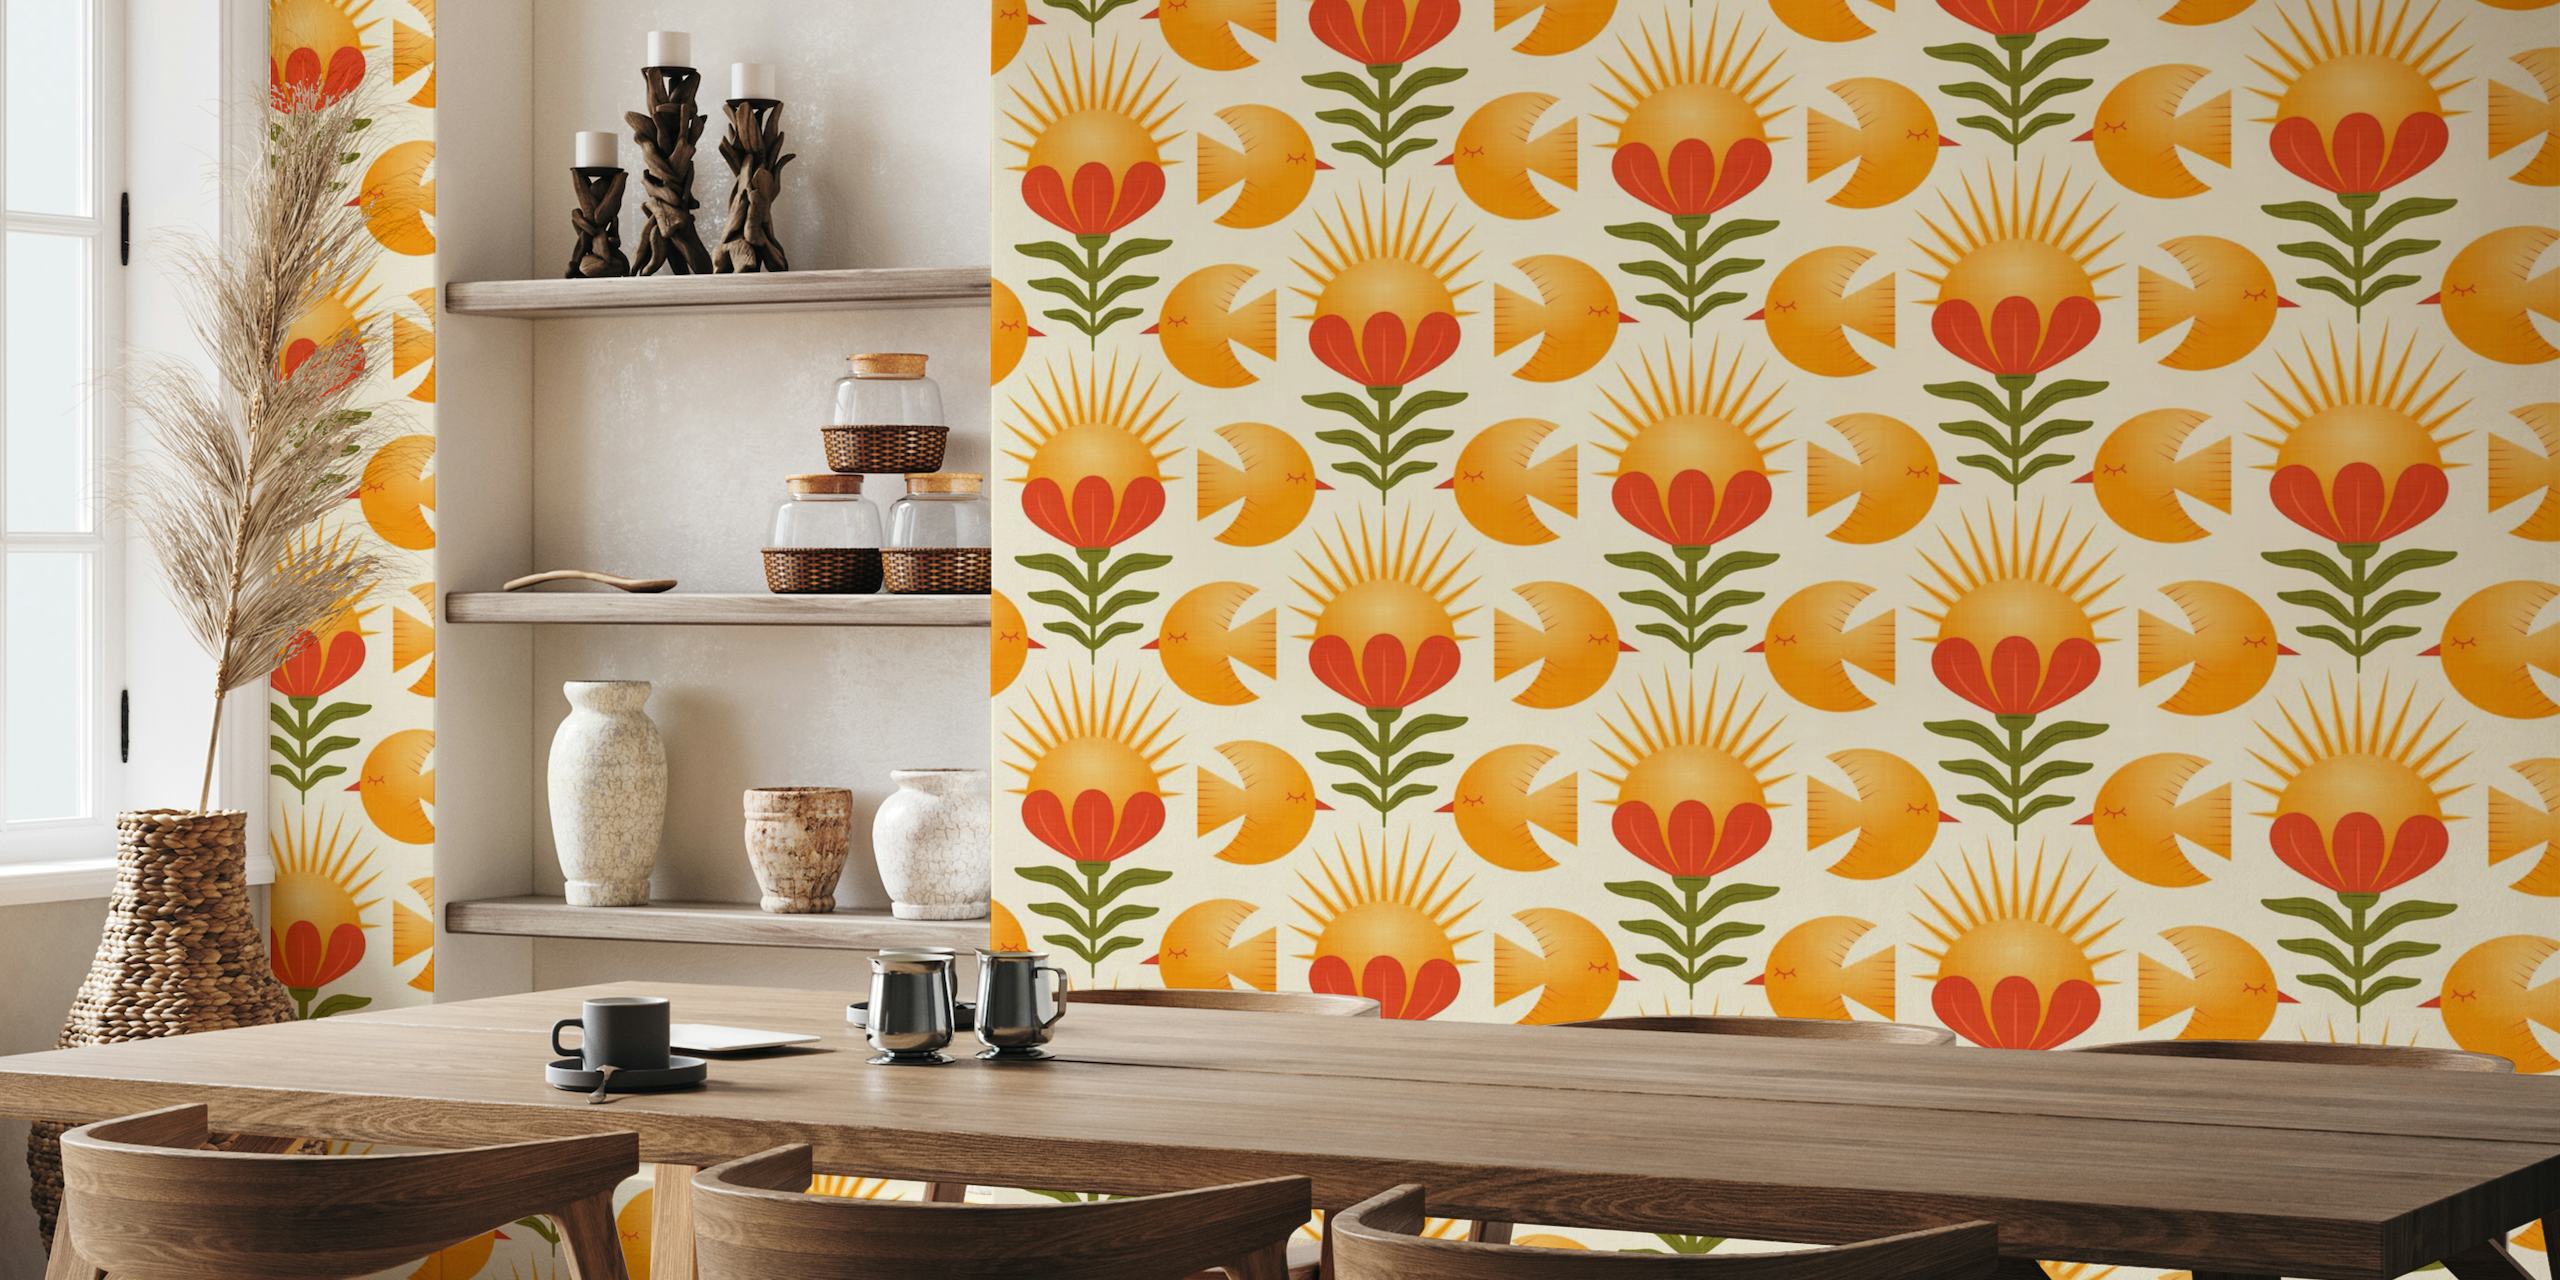 Vintage-inspired wall mural featuring stylized birds, sun shapes, and blooming flowers with a retro color palette.